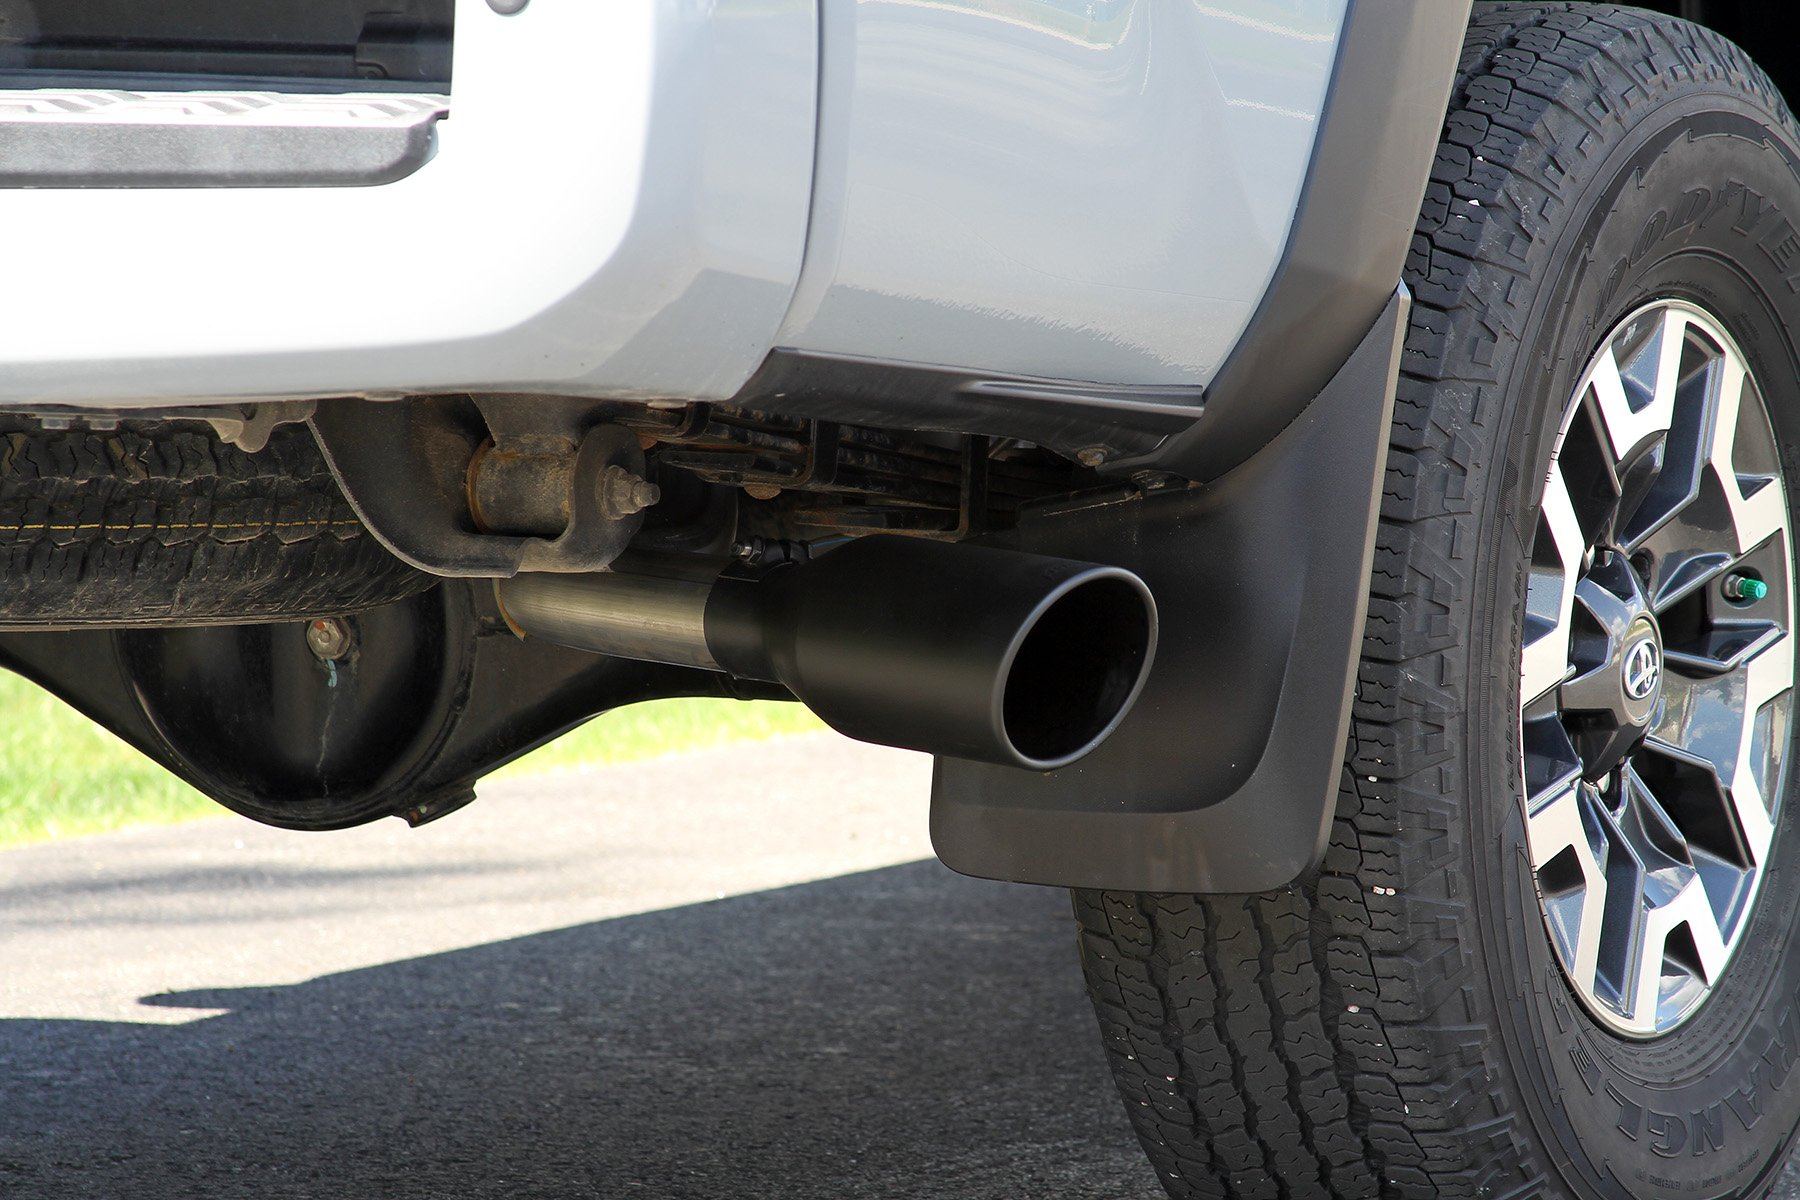 '16-23 Toyota Tacoma Flowmaster FlowFX Cat-Back Exhaust System Performance Flowmaster display